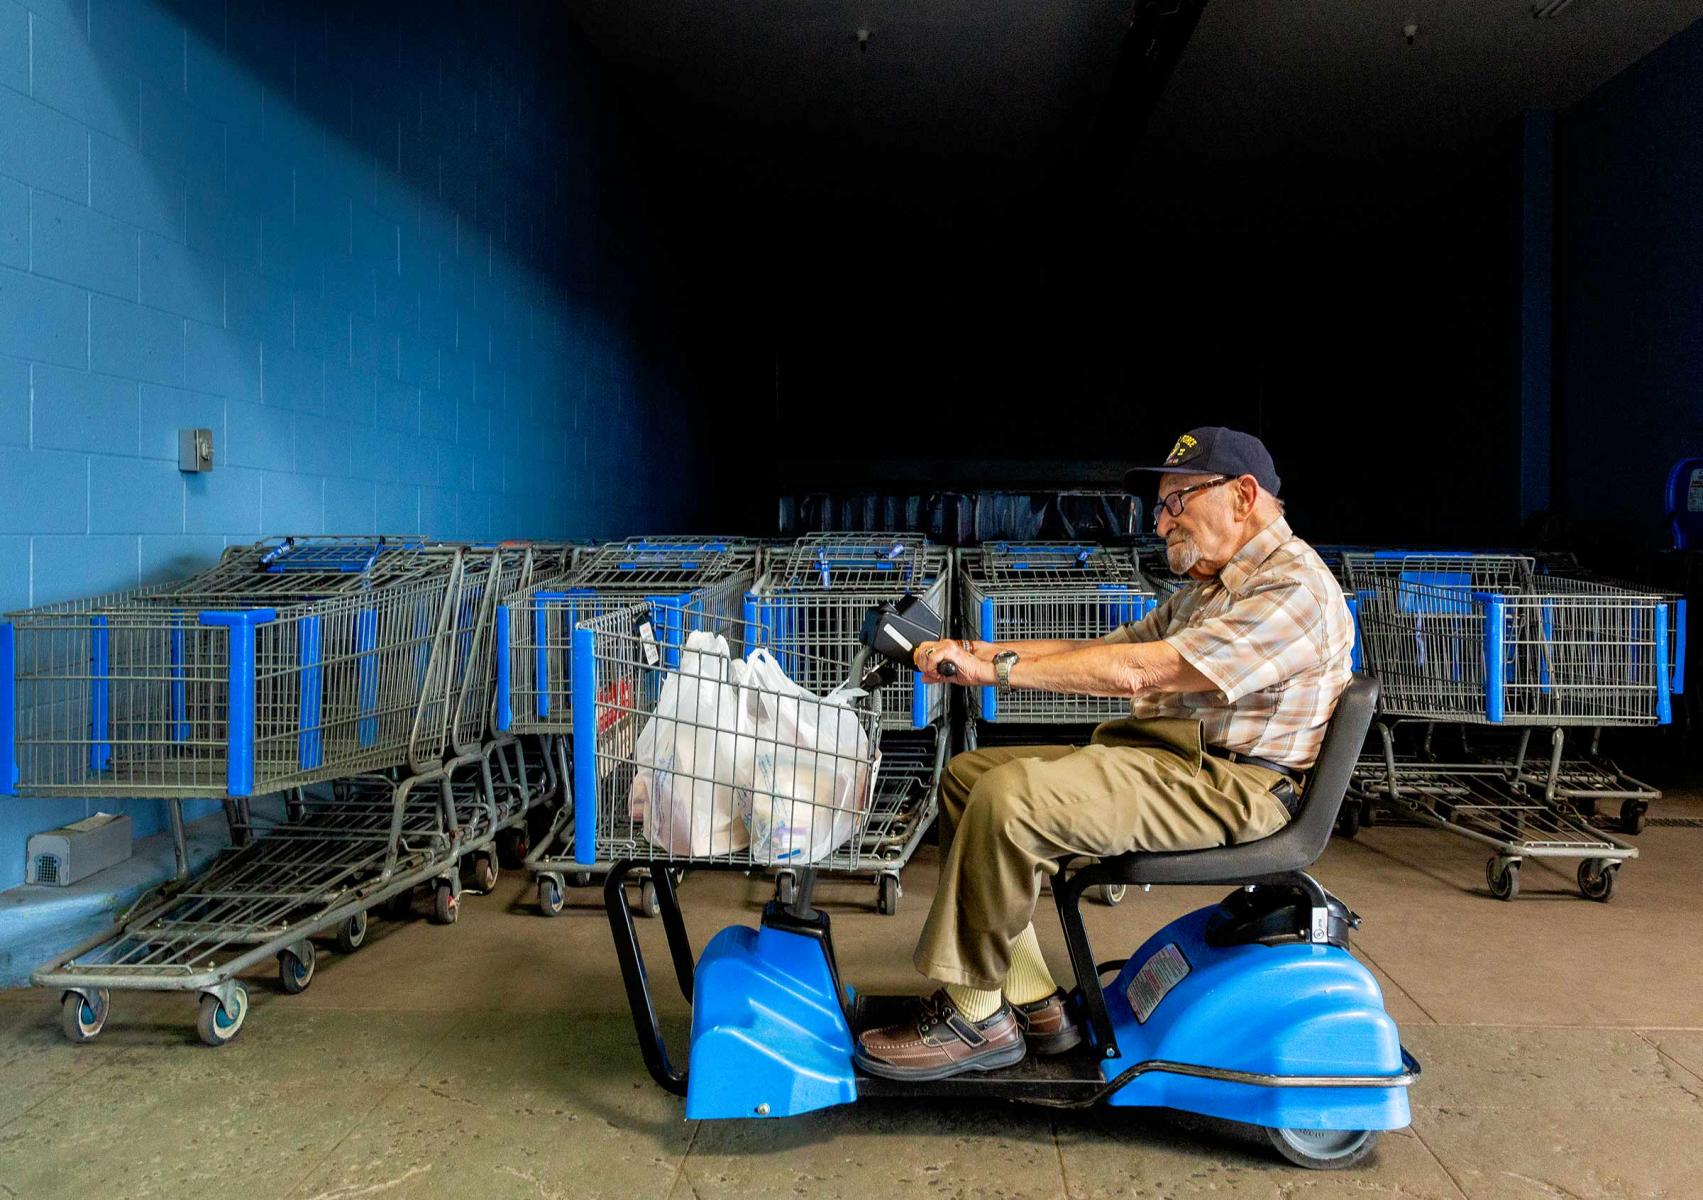 Air Force veteran Richard Gottlieb shopping at Walmart - Alamosa - Colorado : Visiting Mom : New York City based photographer and video specializing in portrait corporate portraits, video, editorial stories for on location and architectural photography